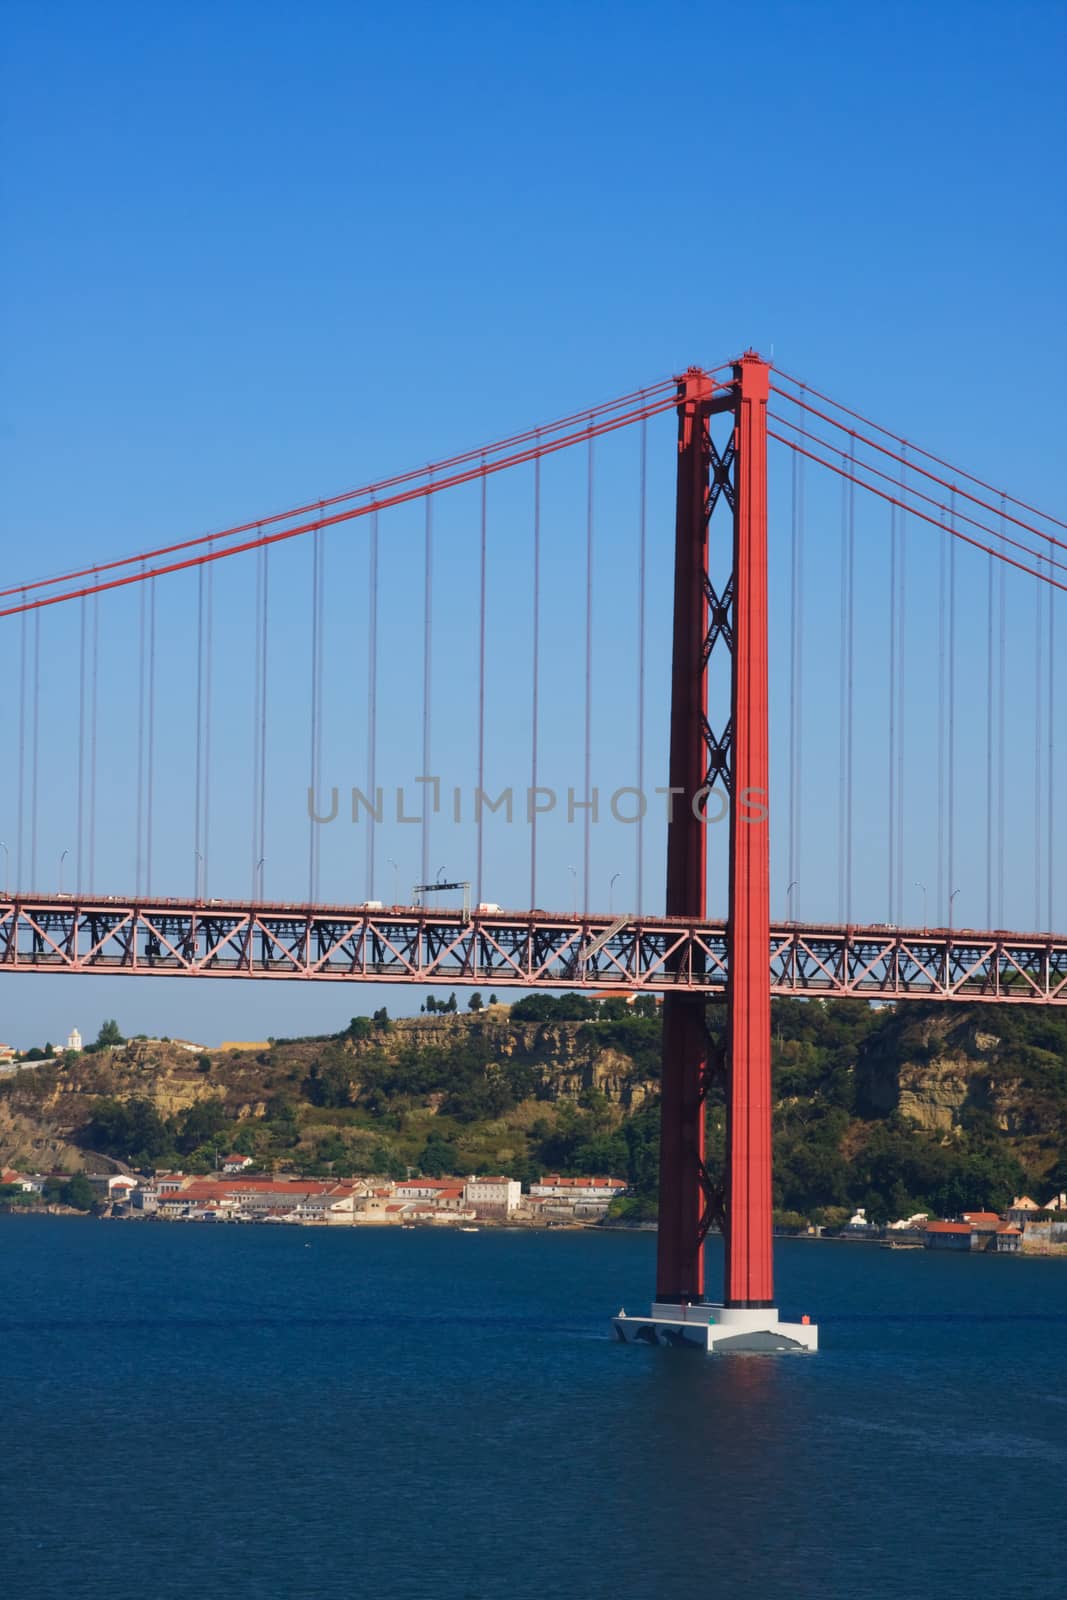 The Ponte 25 de Abril is a suspension bridge across the river Tejo linking the cities of Lisbon and Almada in Portugal.